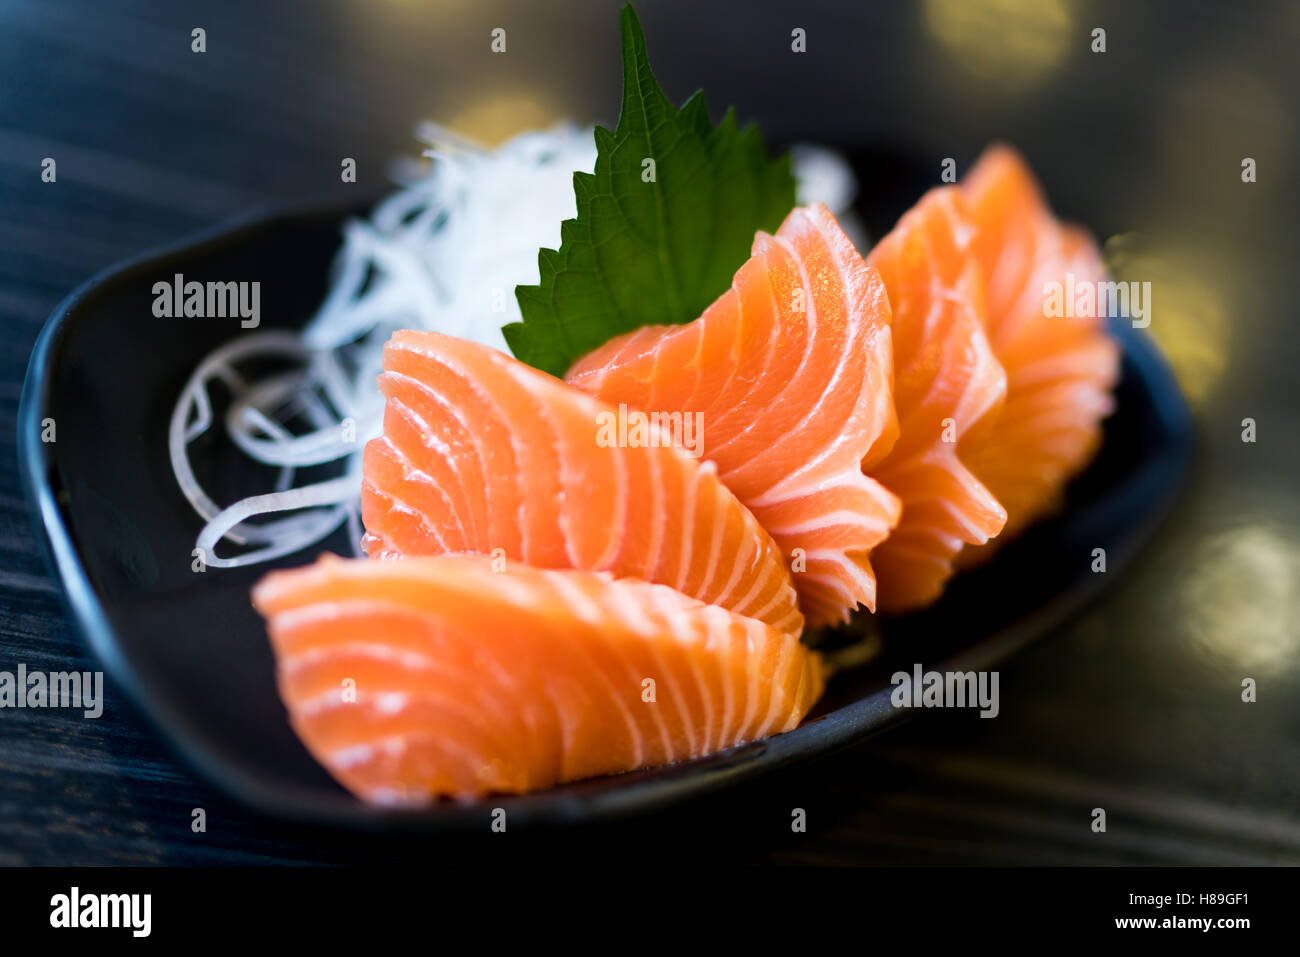 Sliced salmon sashimi, Japanese raw food delicious menu, famous fish from Norway Stock Photo